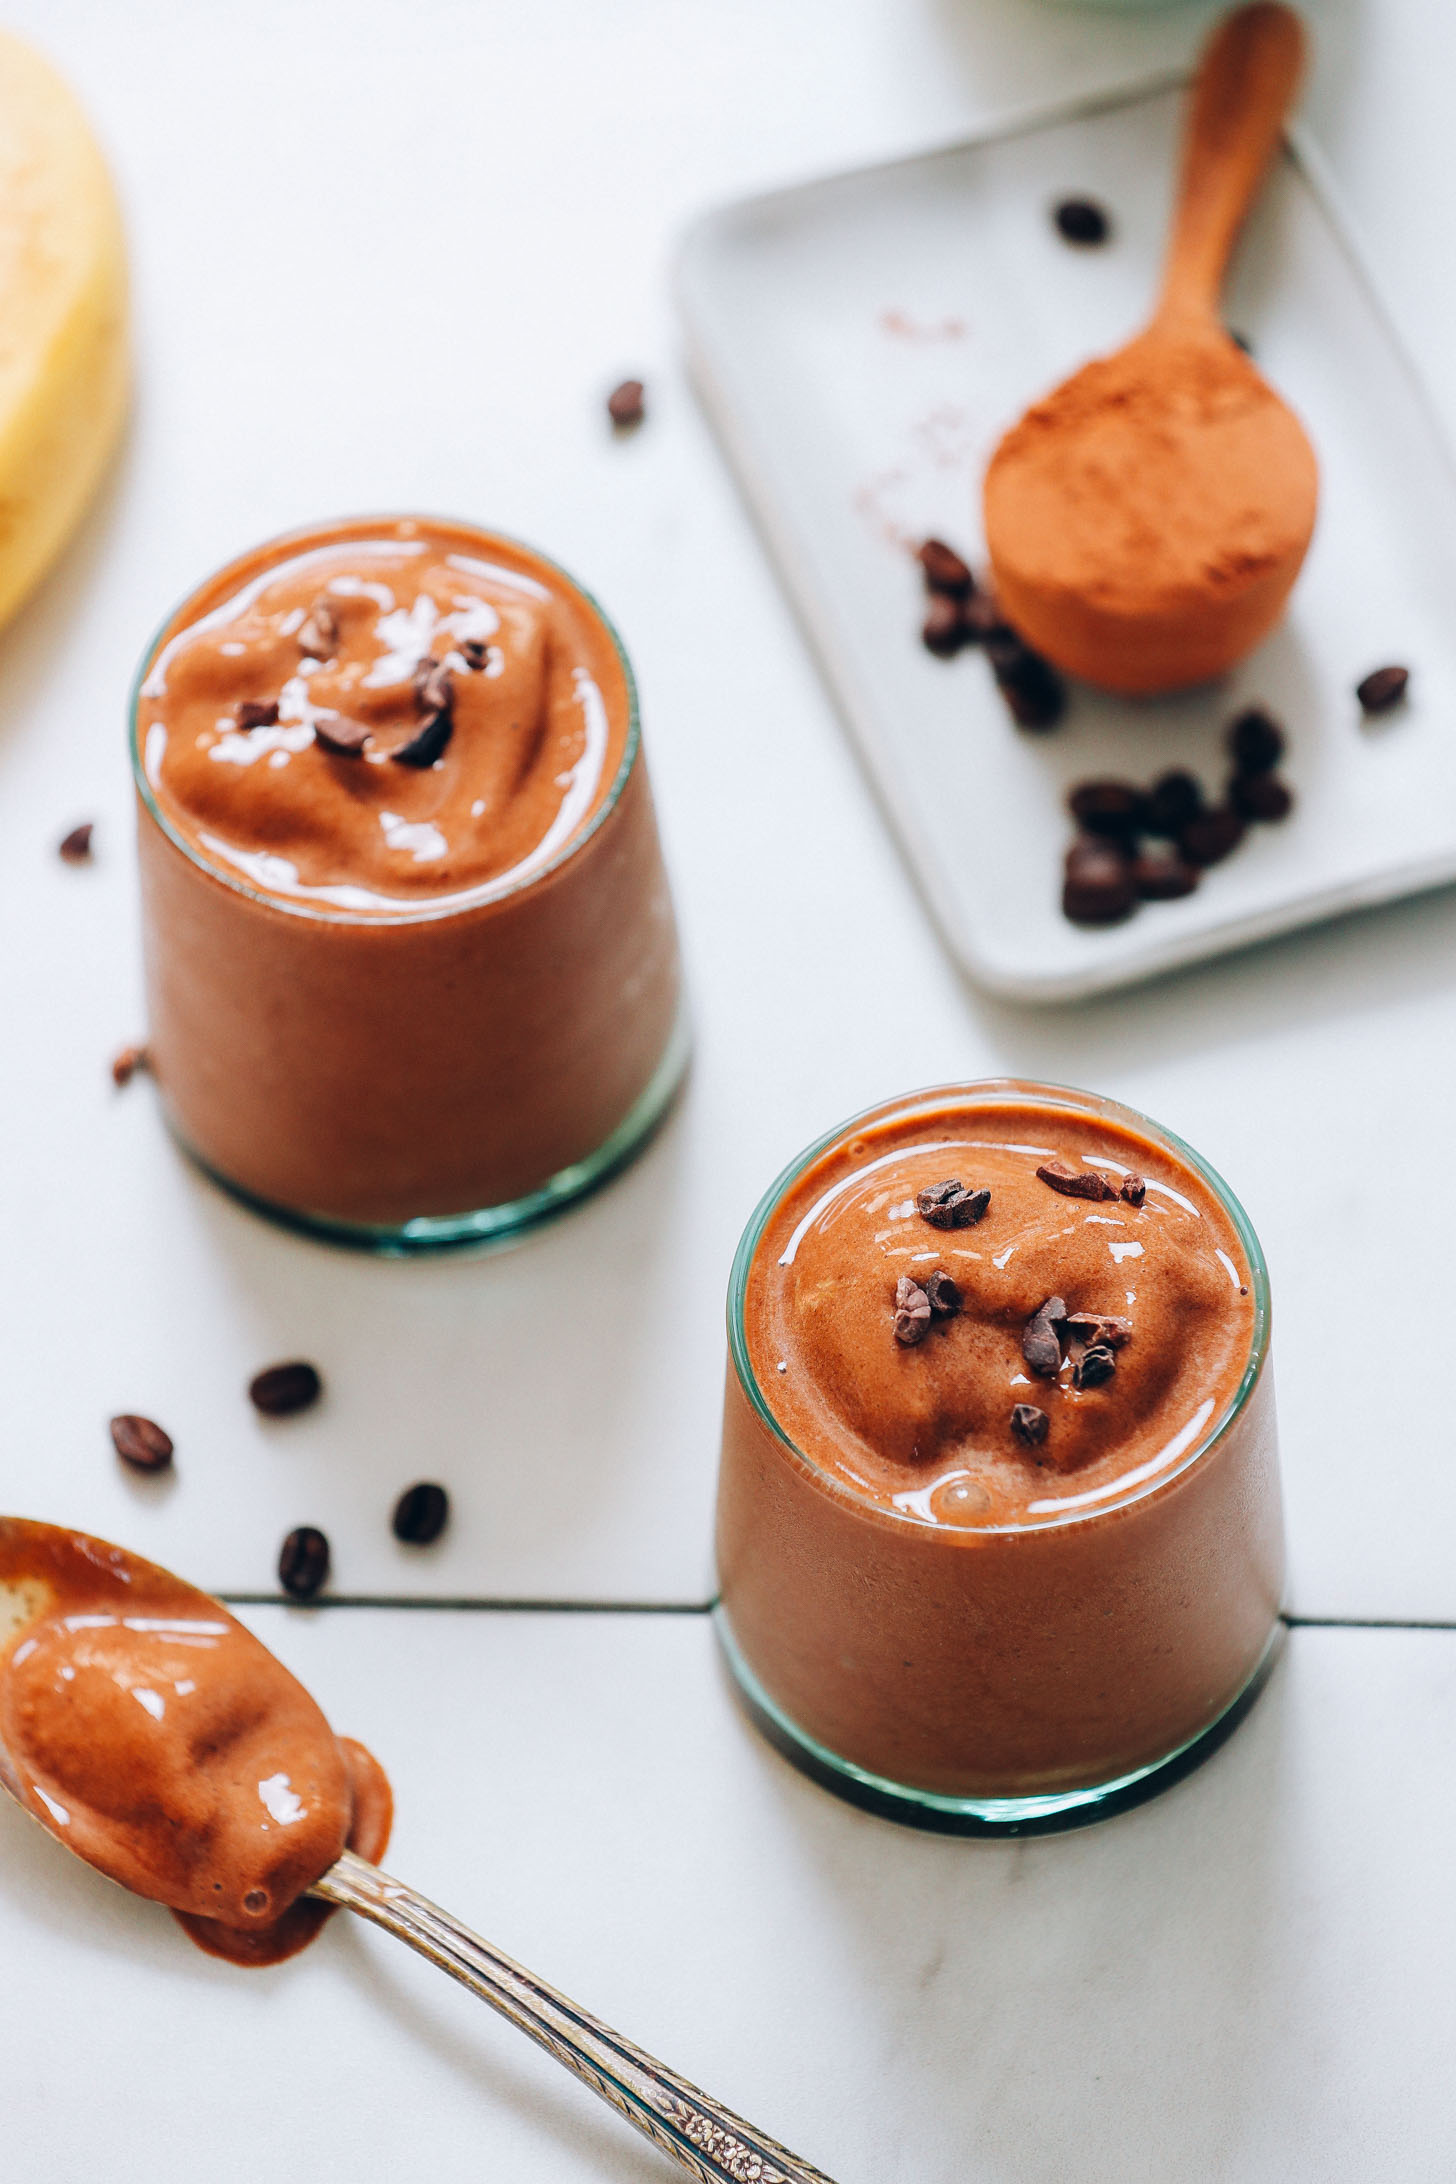 Spoonful and glasses of our Creamy Coffee Smoothie recipe